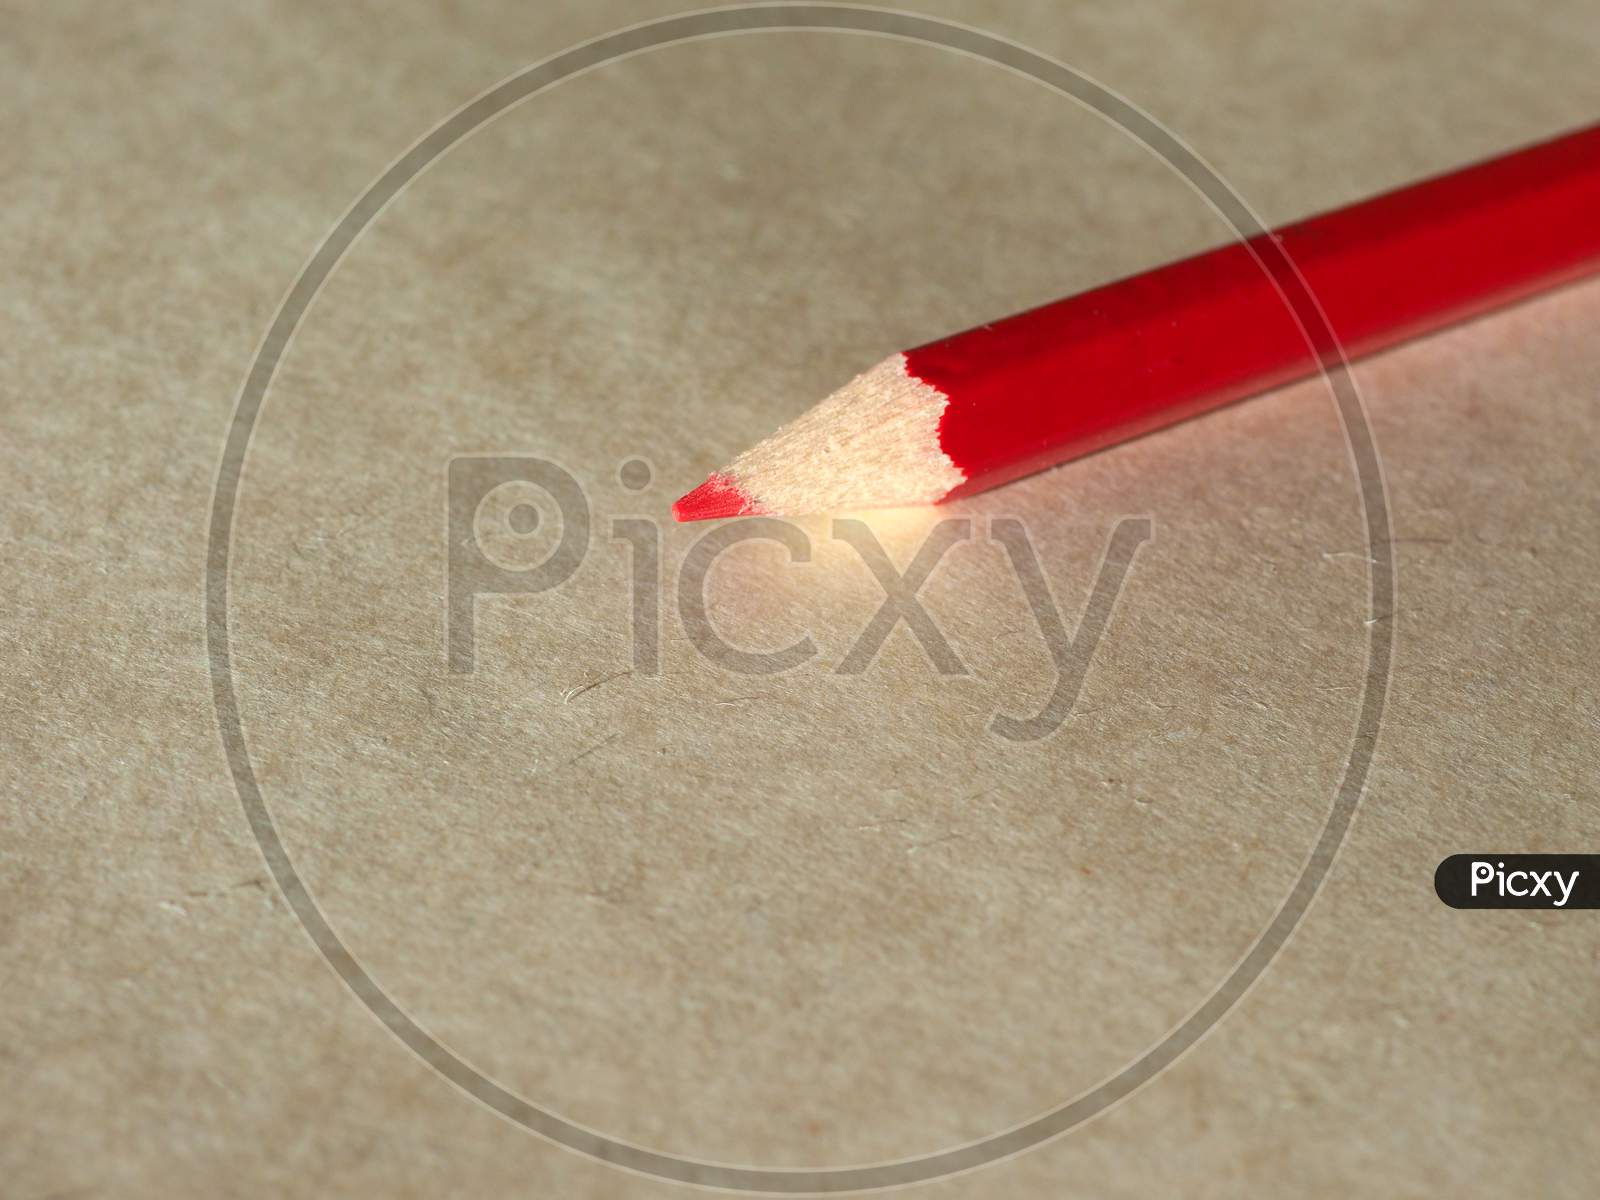 Red Pencil Over Paper